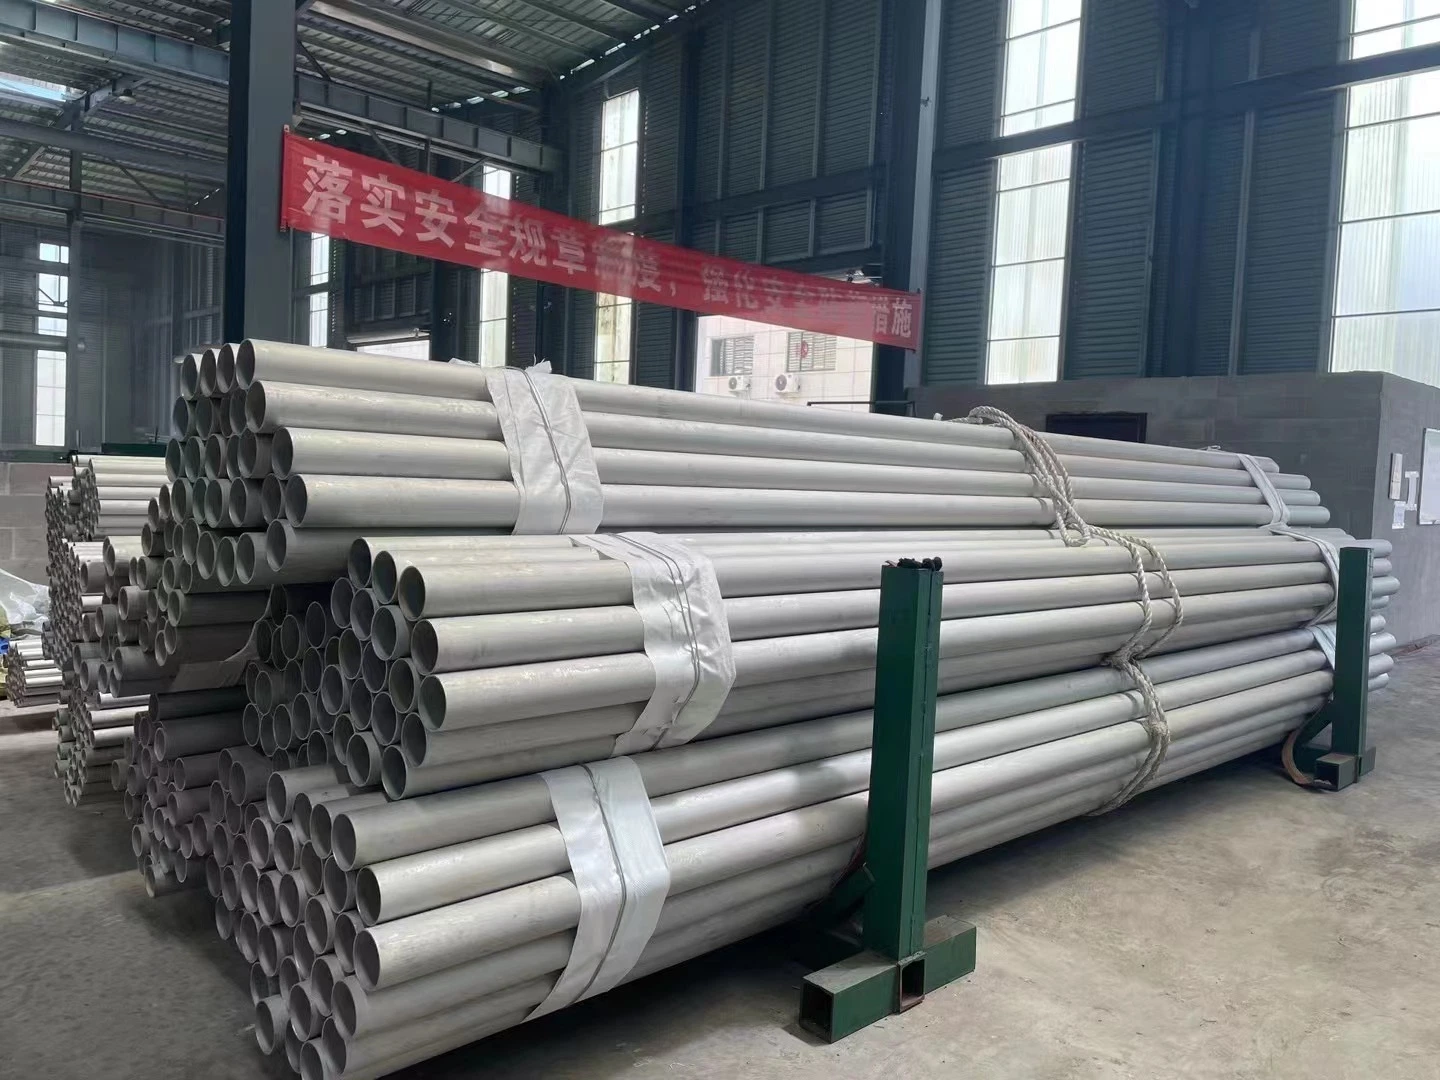 Hot Sell Welding Industrial Pipe ASTM A312 TP304 316 Flexible Pipe Stainless Steel Water Pipe Hose 304